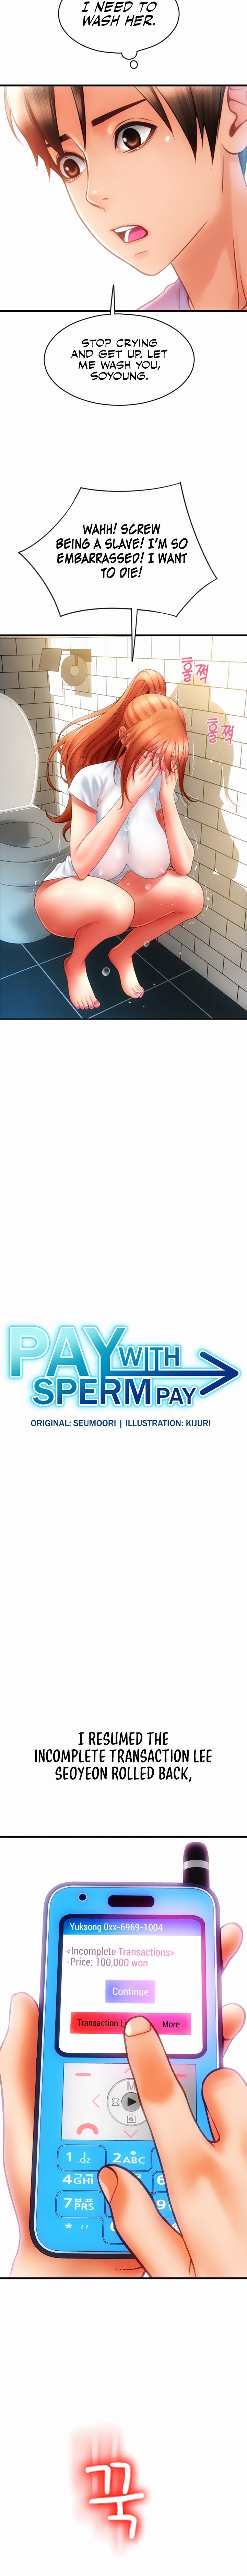 Pay with Sperm Pay - Chapter 46 Page 2